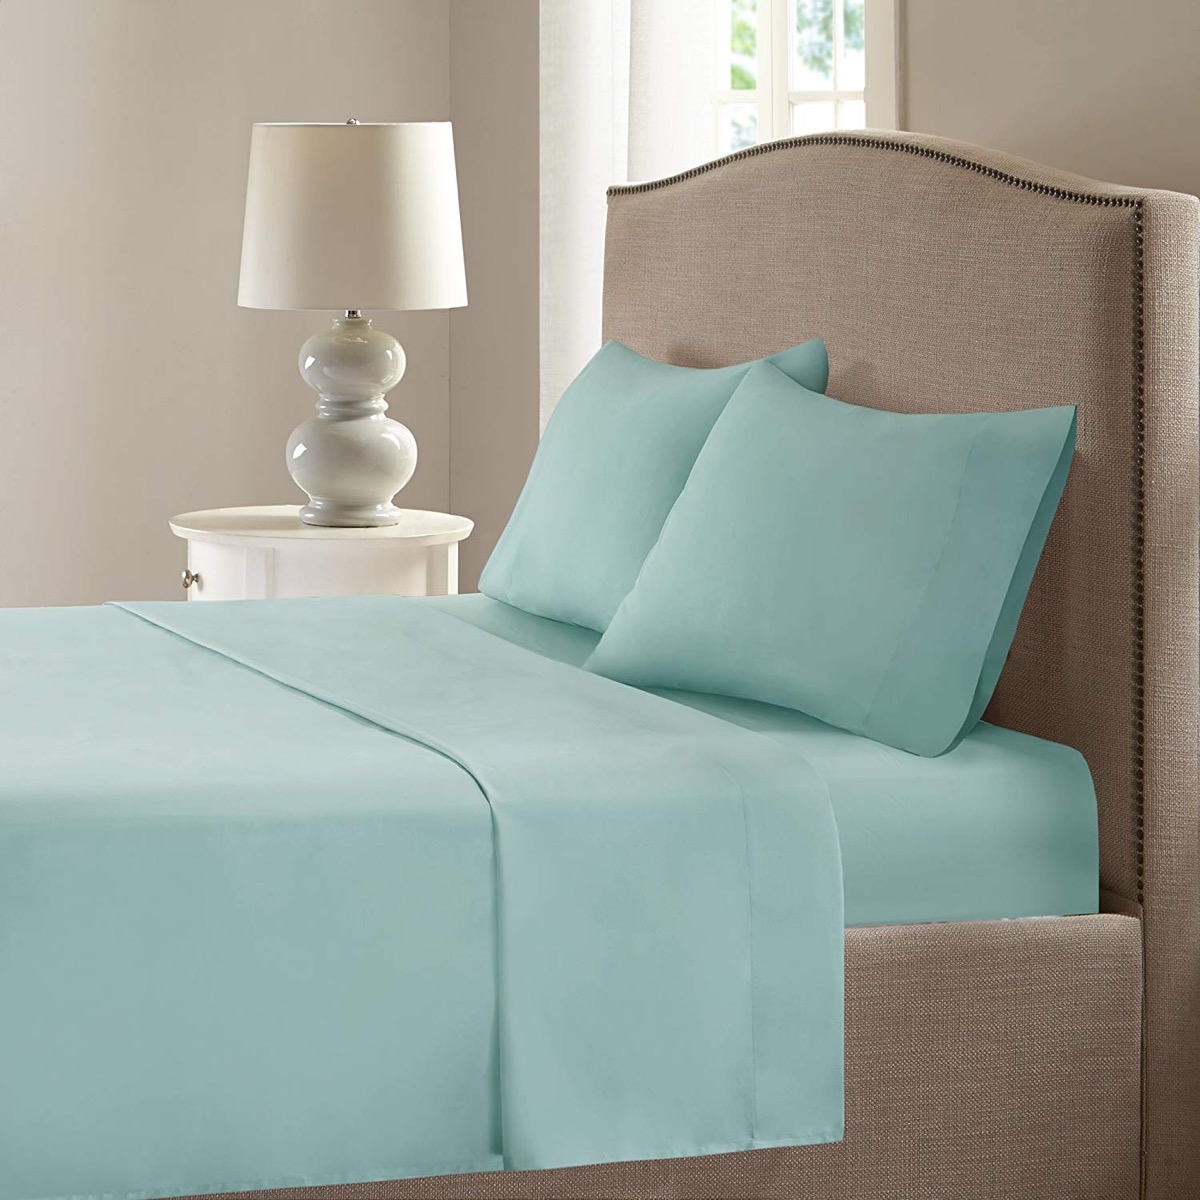 teal bedsheets, cooling products